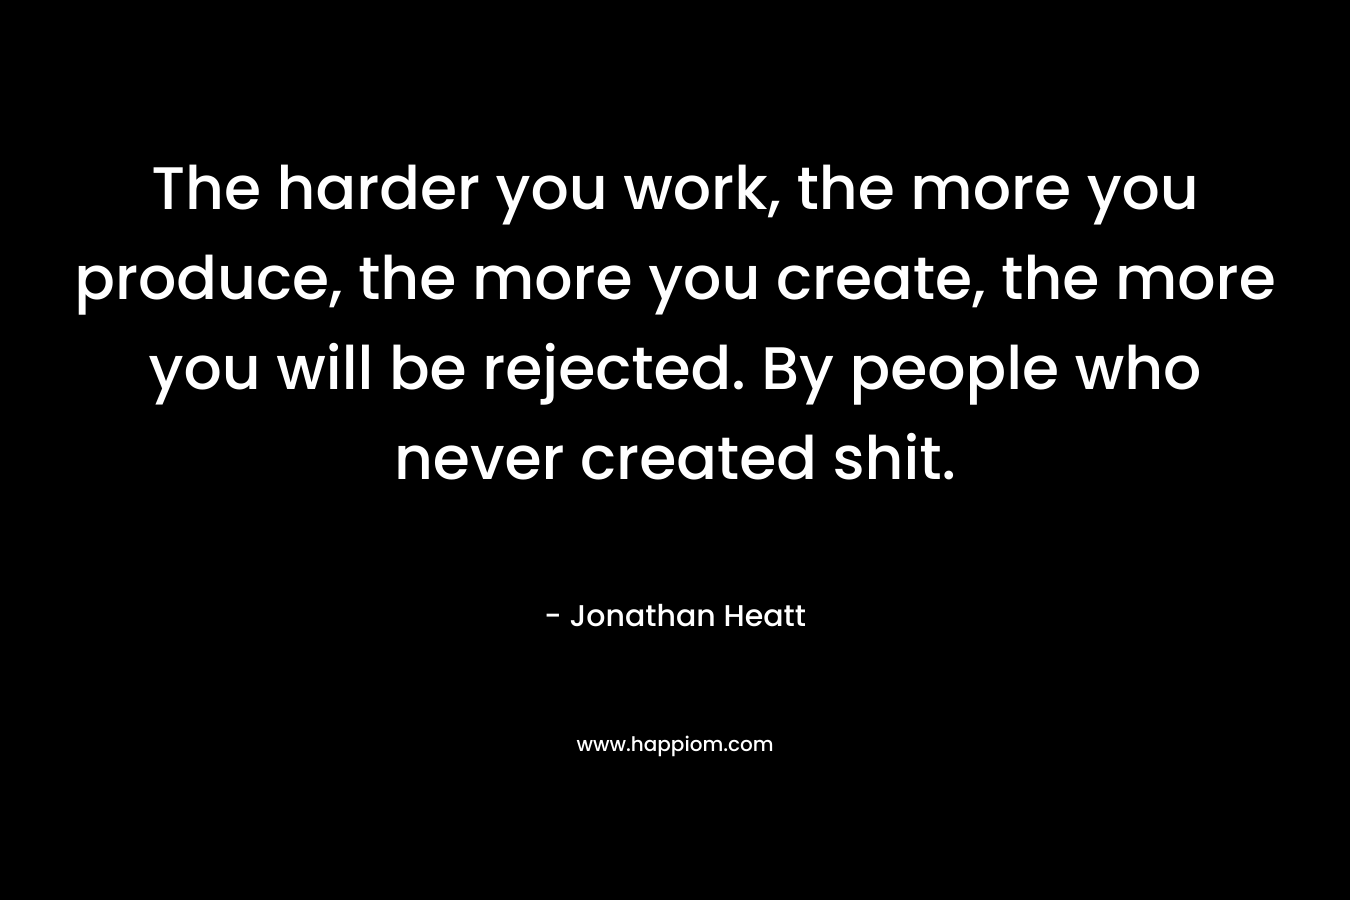 The harder you work, the more you produce, the more you create, the more you will be rejected. By people who never created shit.